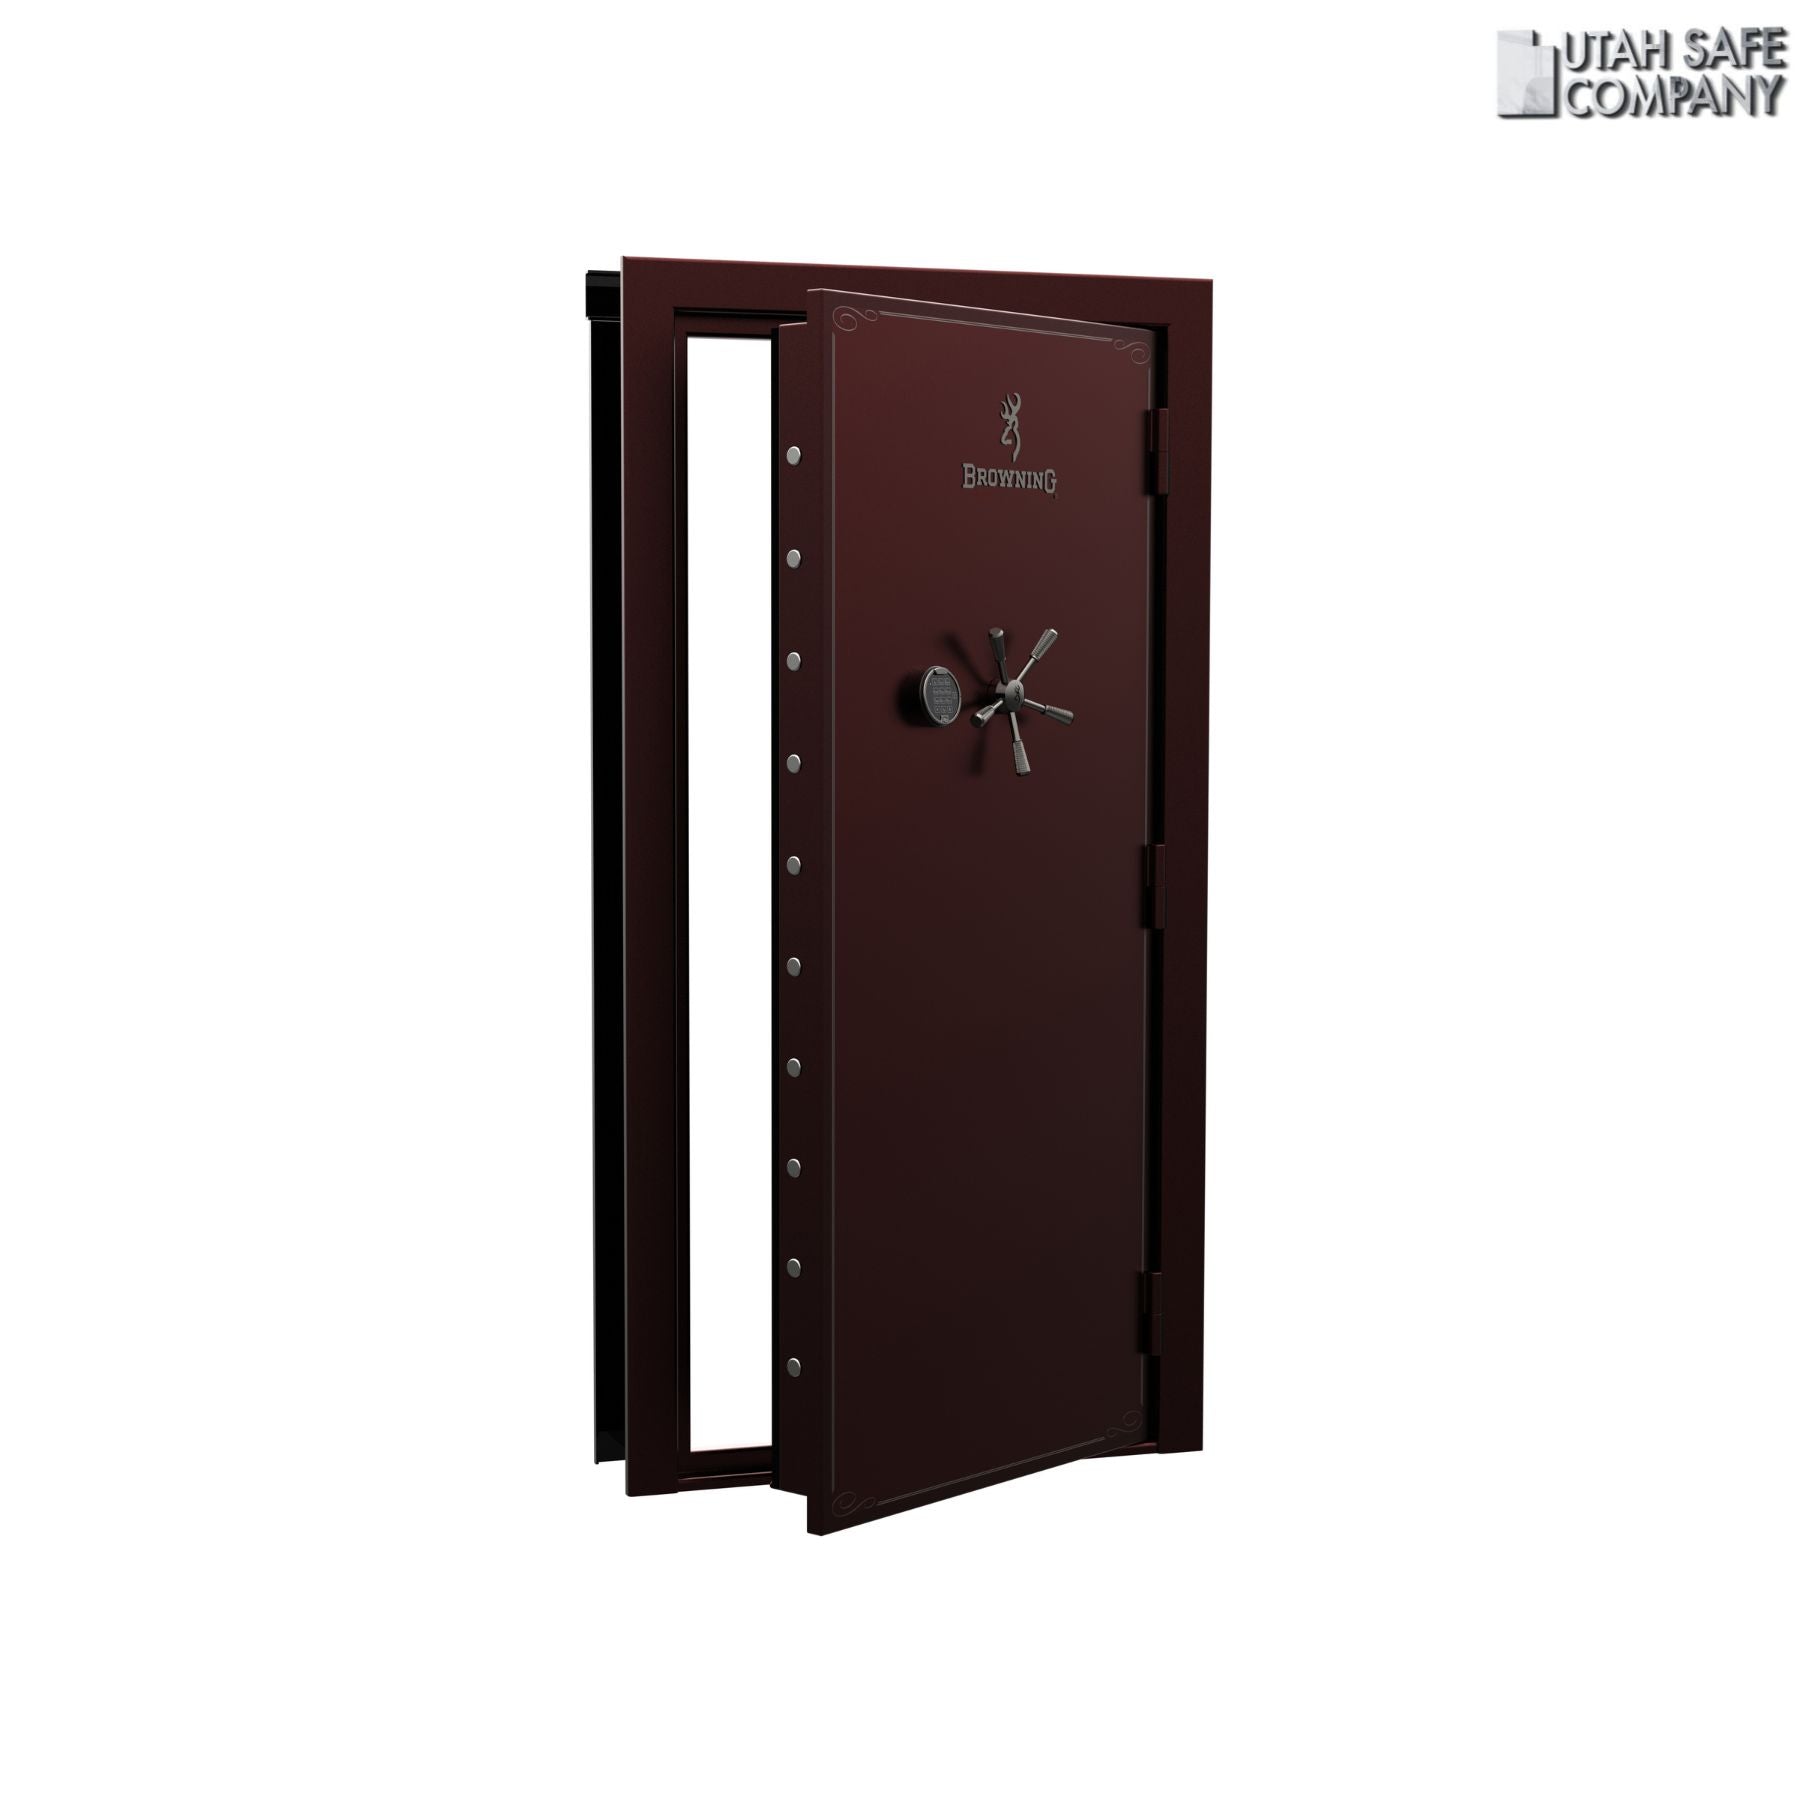 Browning Clamshell Out-Swing Vault Door - Utah Safe Company